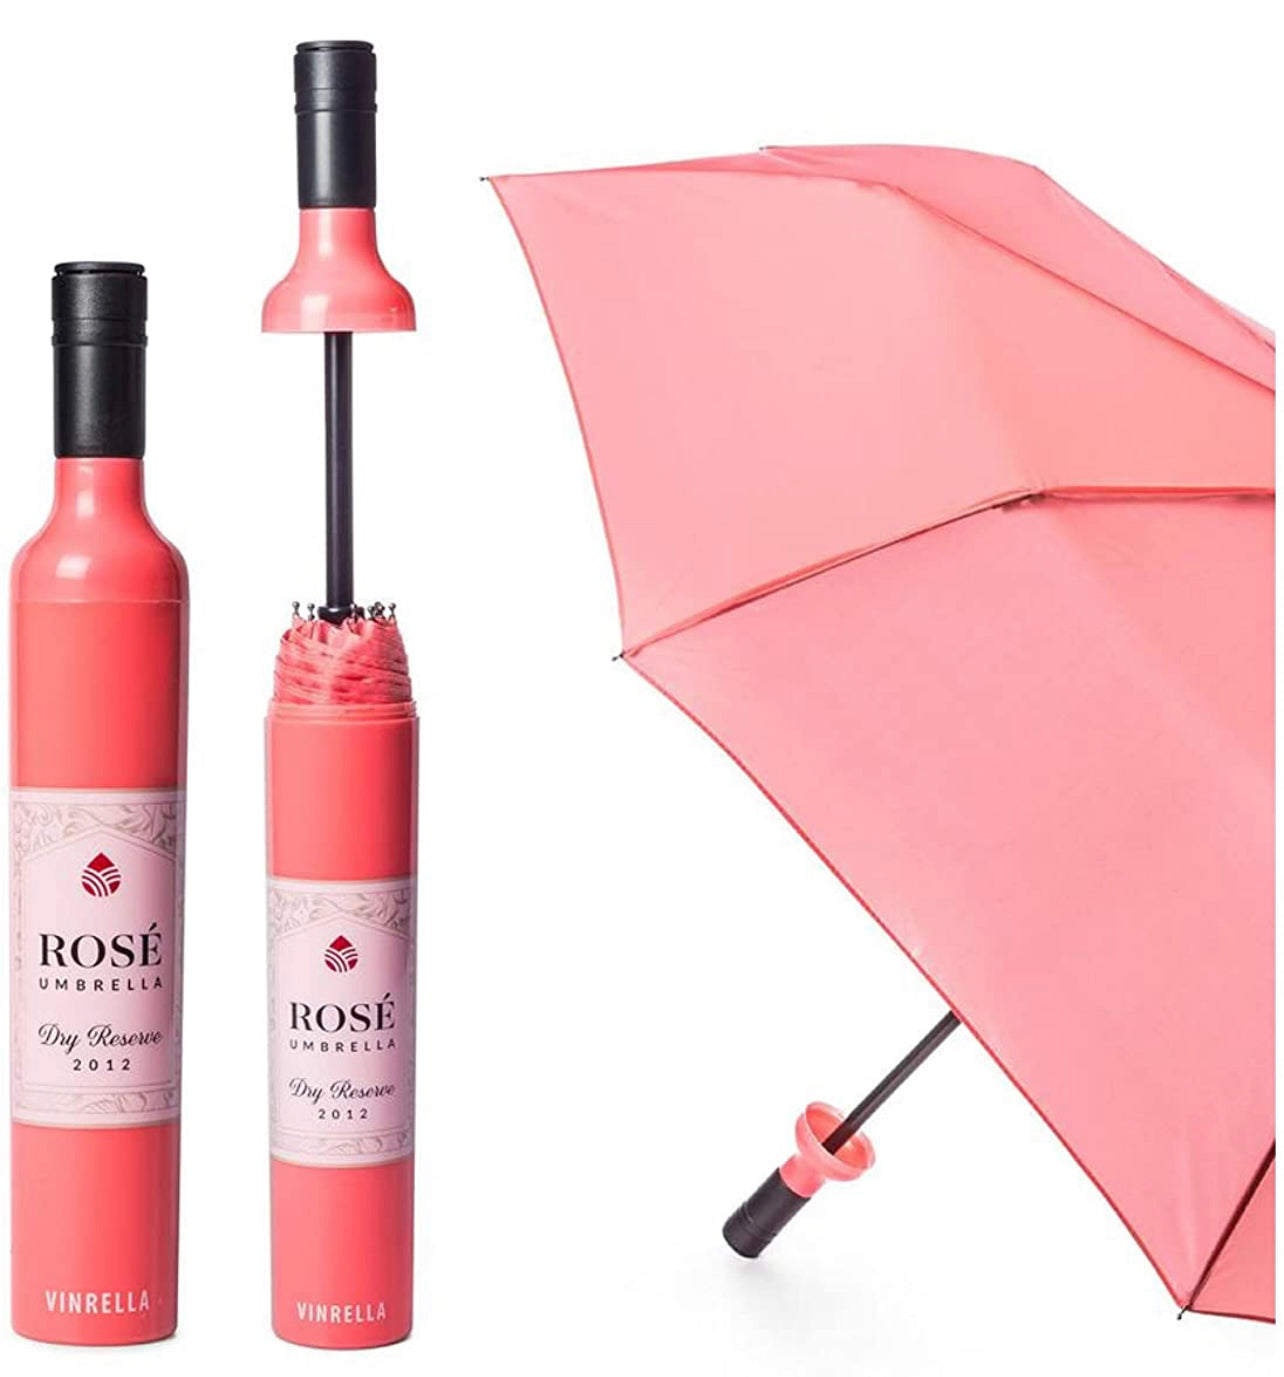 Umbrella in a Bottle, available in multiple different colors and styles